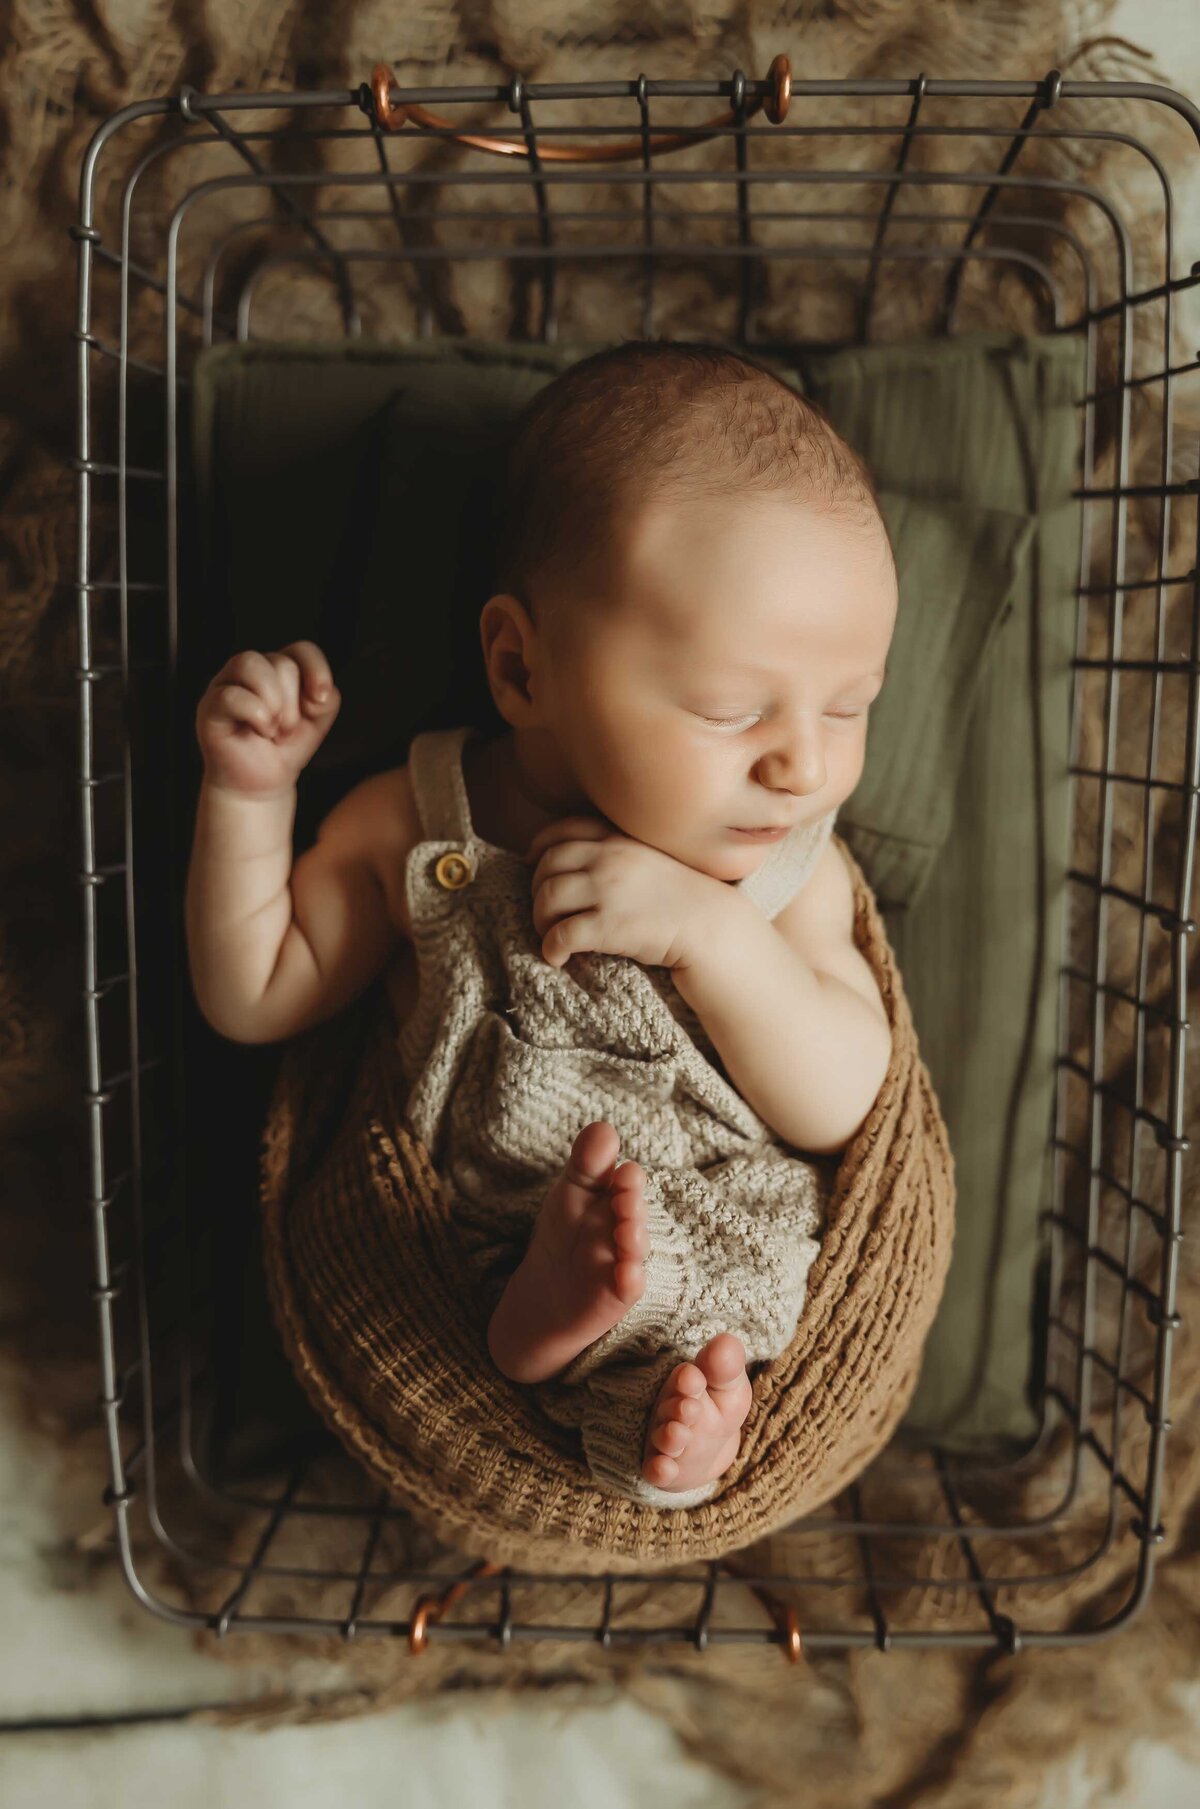 Nweborn baby wearing a gray overall sleeping inside a basket